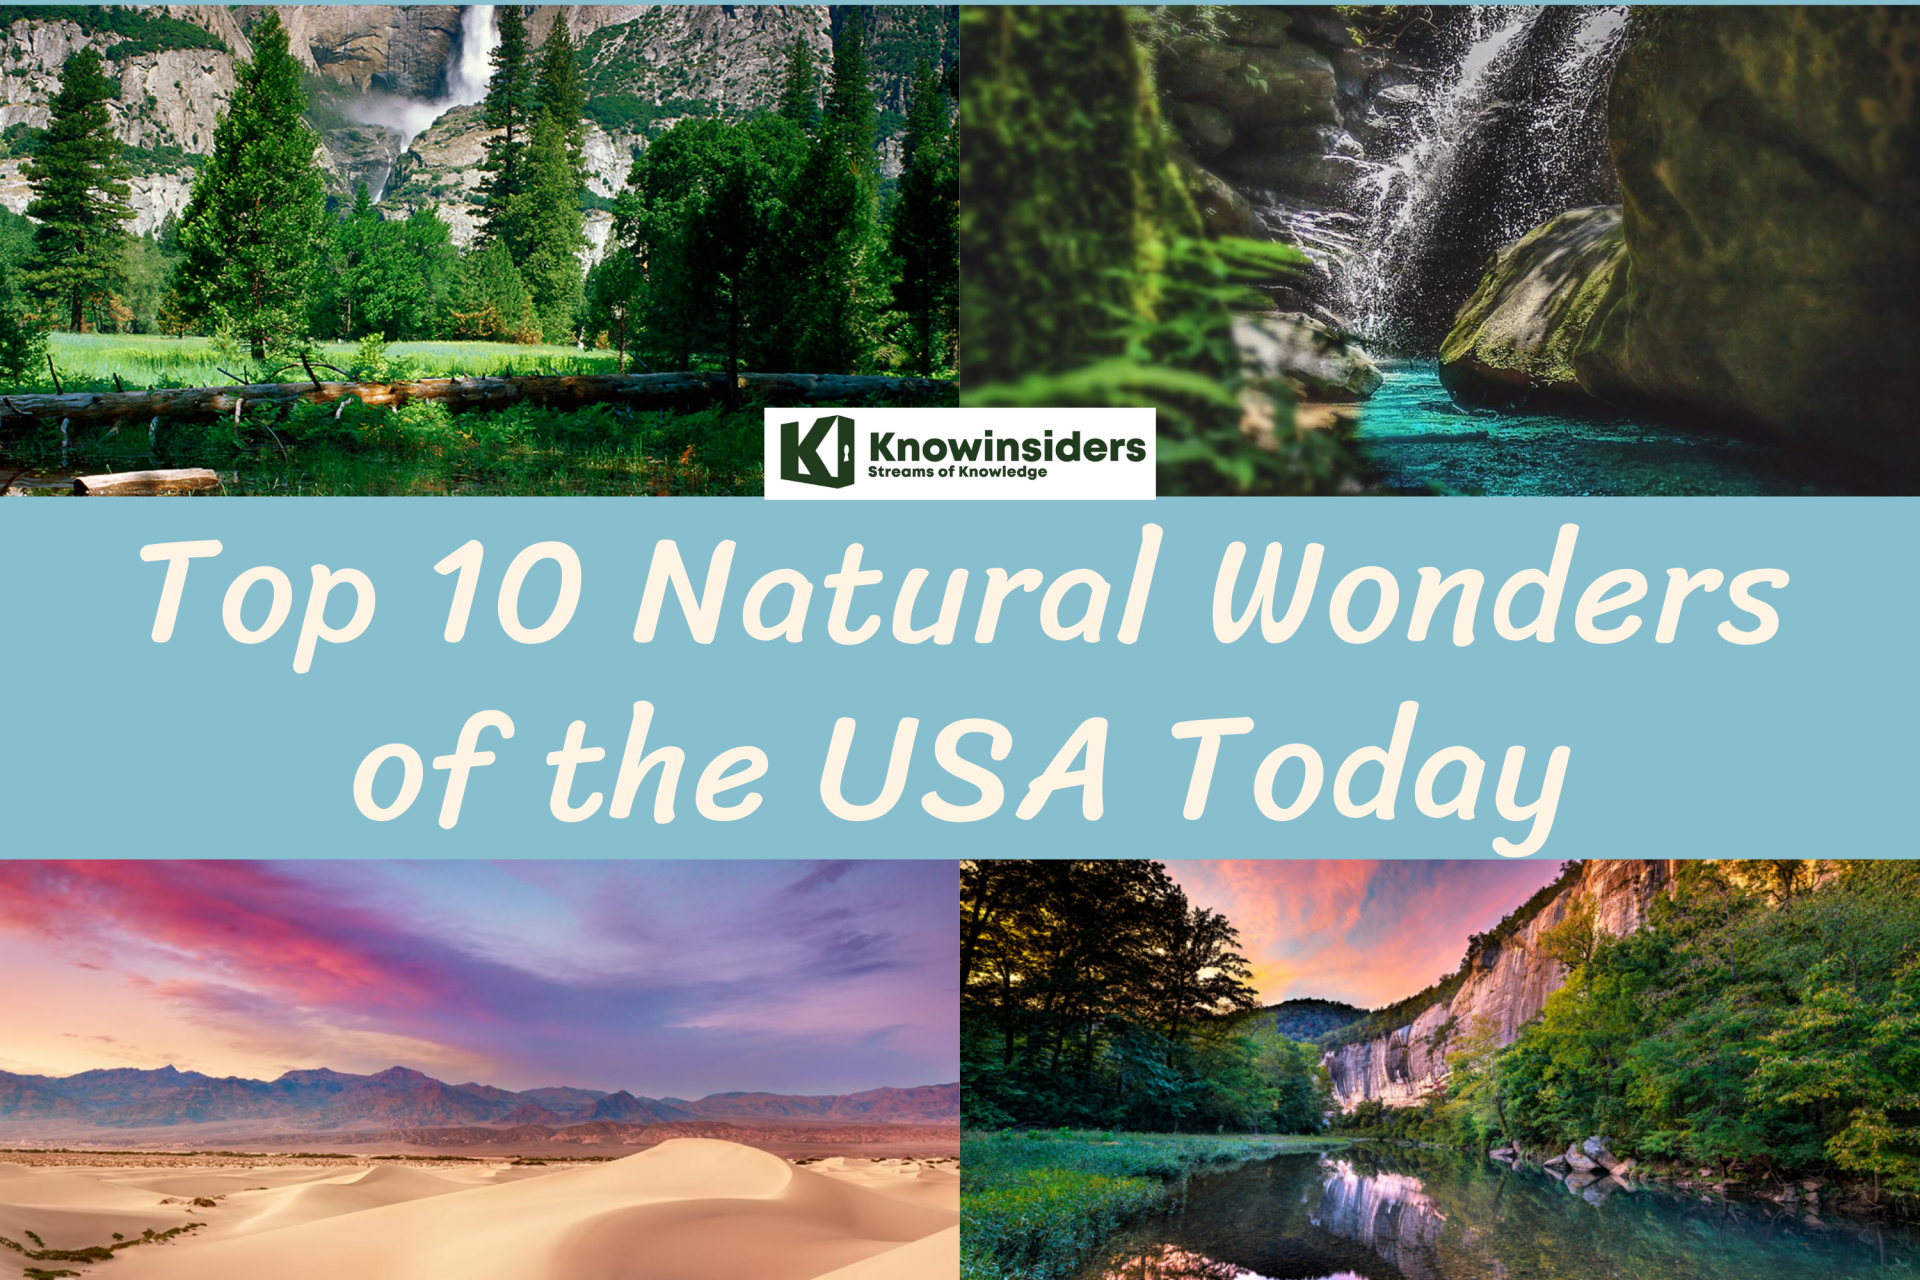 Top 10 Breathtaking Natural Wonders In the U.S Today